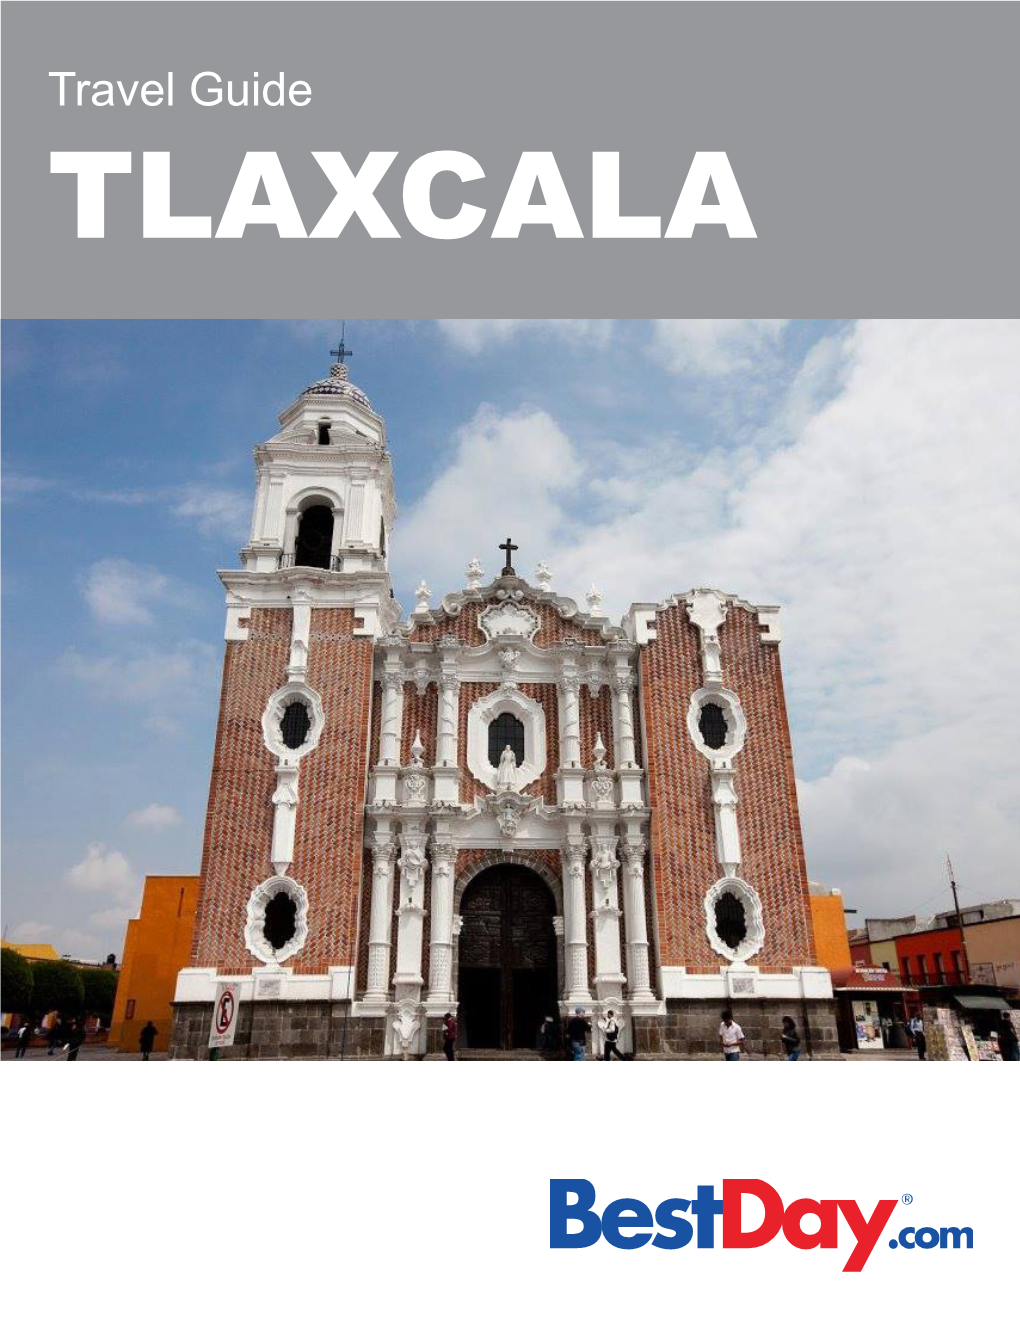 Travel Guide TLAXCALA Contents